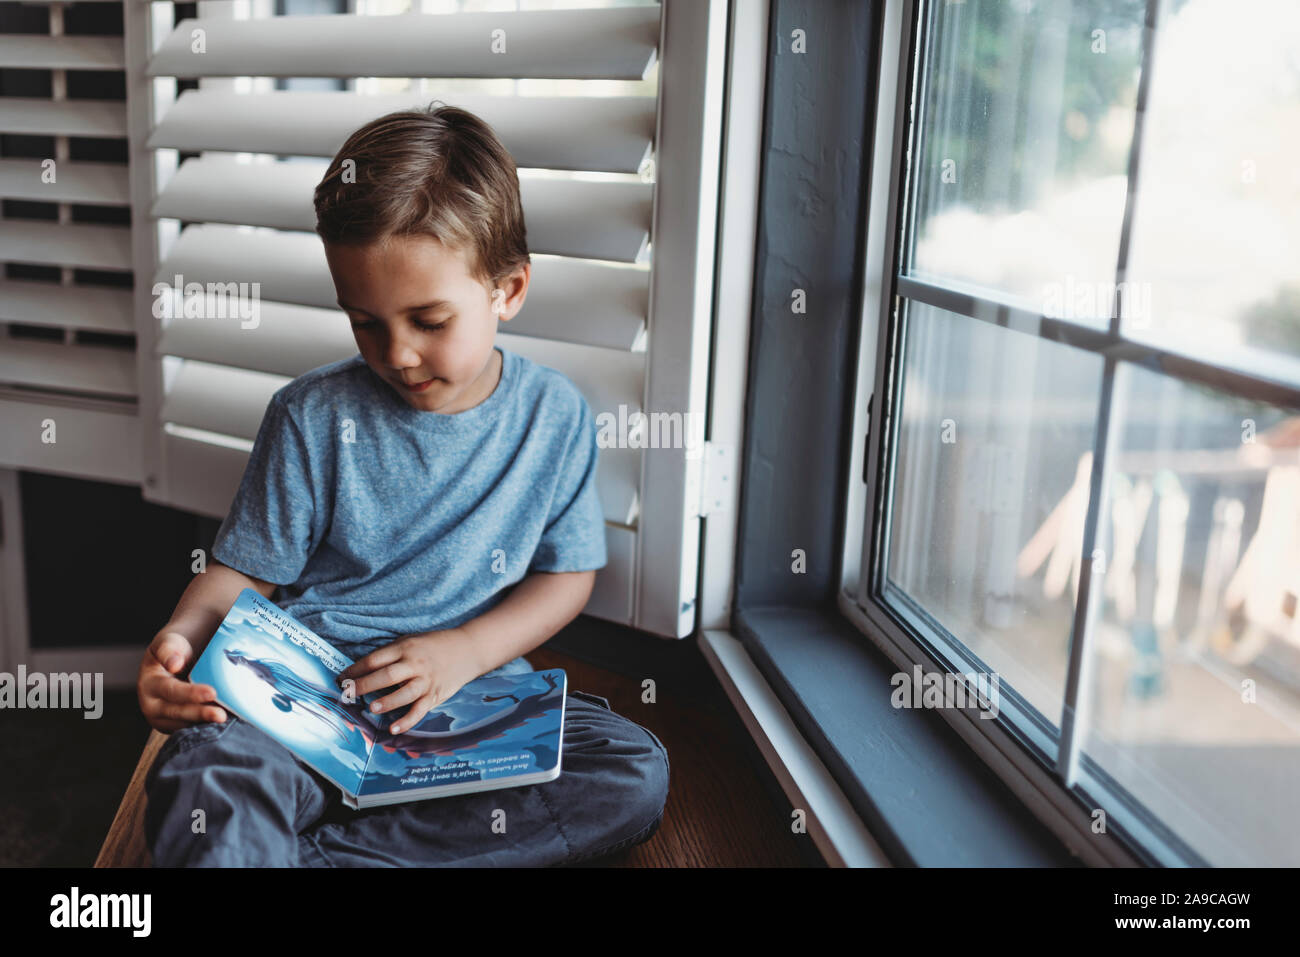 Young boy reading book by window with shutters Stock Photo